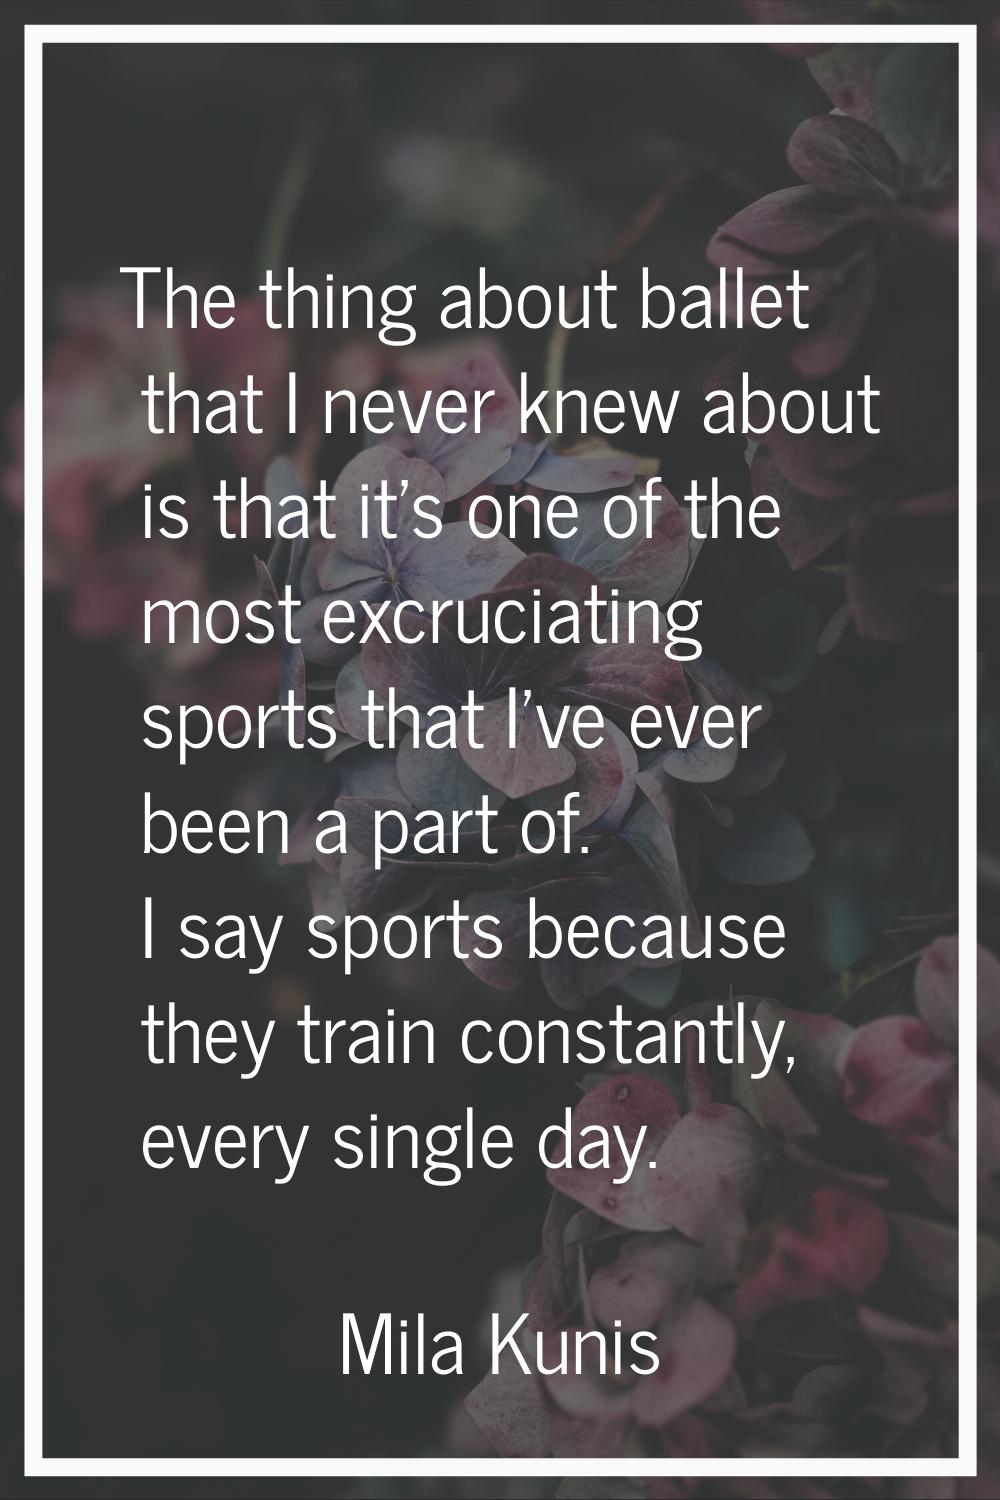 The thing about ballet that I never knew about is that it's one of the most excruciating sports tha